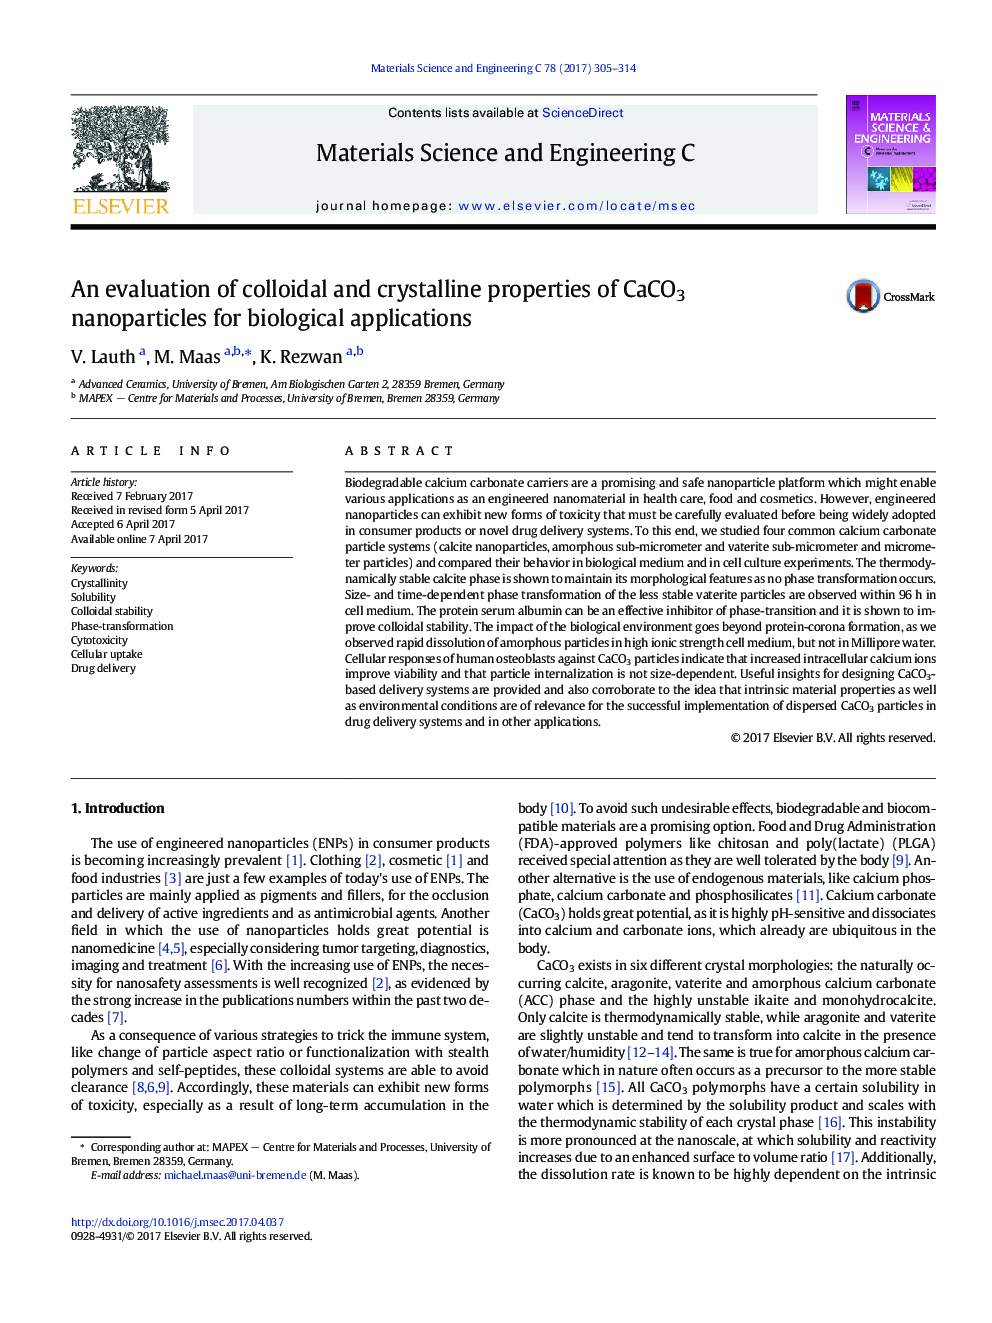 An evaluation of colloidal and crystalline properties of CaCO3 nanoparticles for biological applications